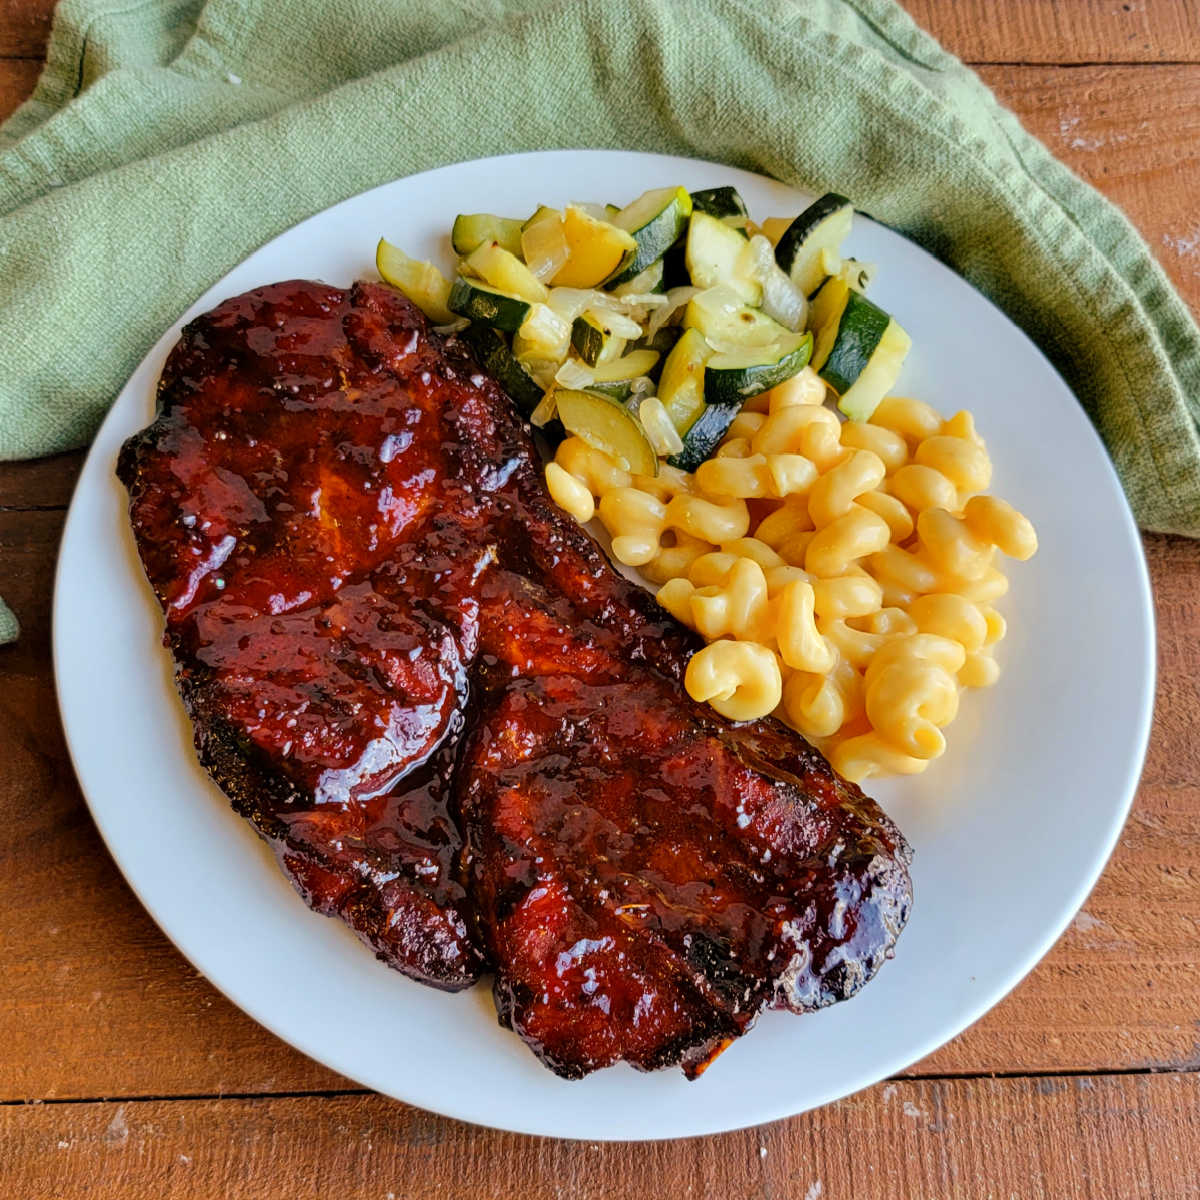 Dinner plate with a glossy bbq pork steak, macaroni and cheese, and sauteed zucchini.